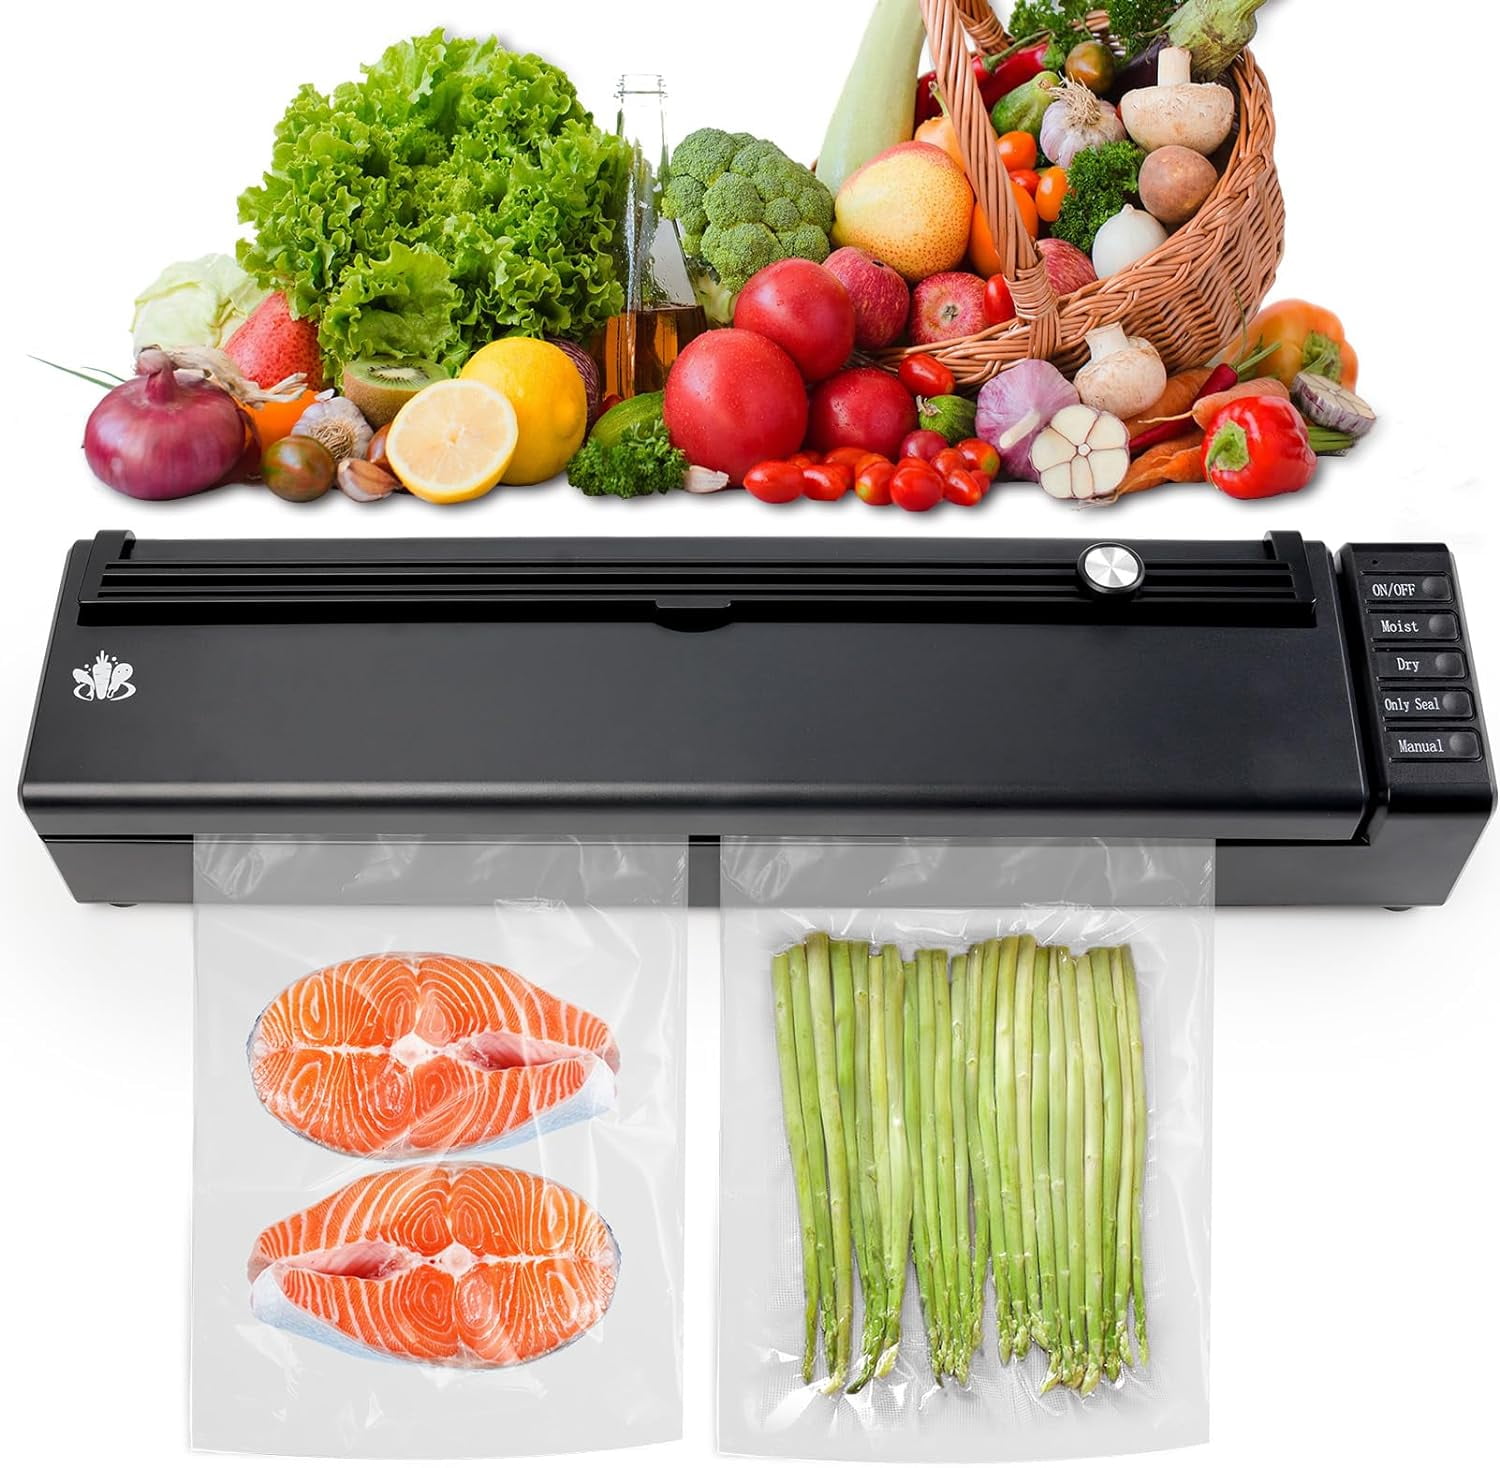 MegaChef Home Vacuum Sealer and Food Preserver with Extra Bags Included -  9252417